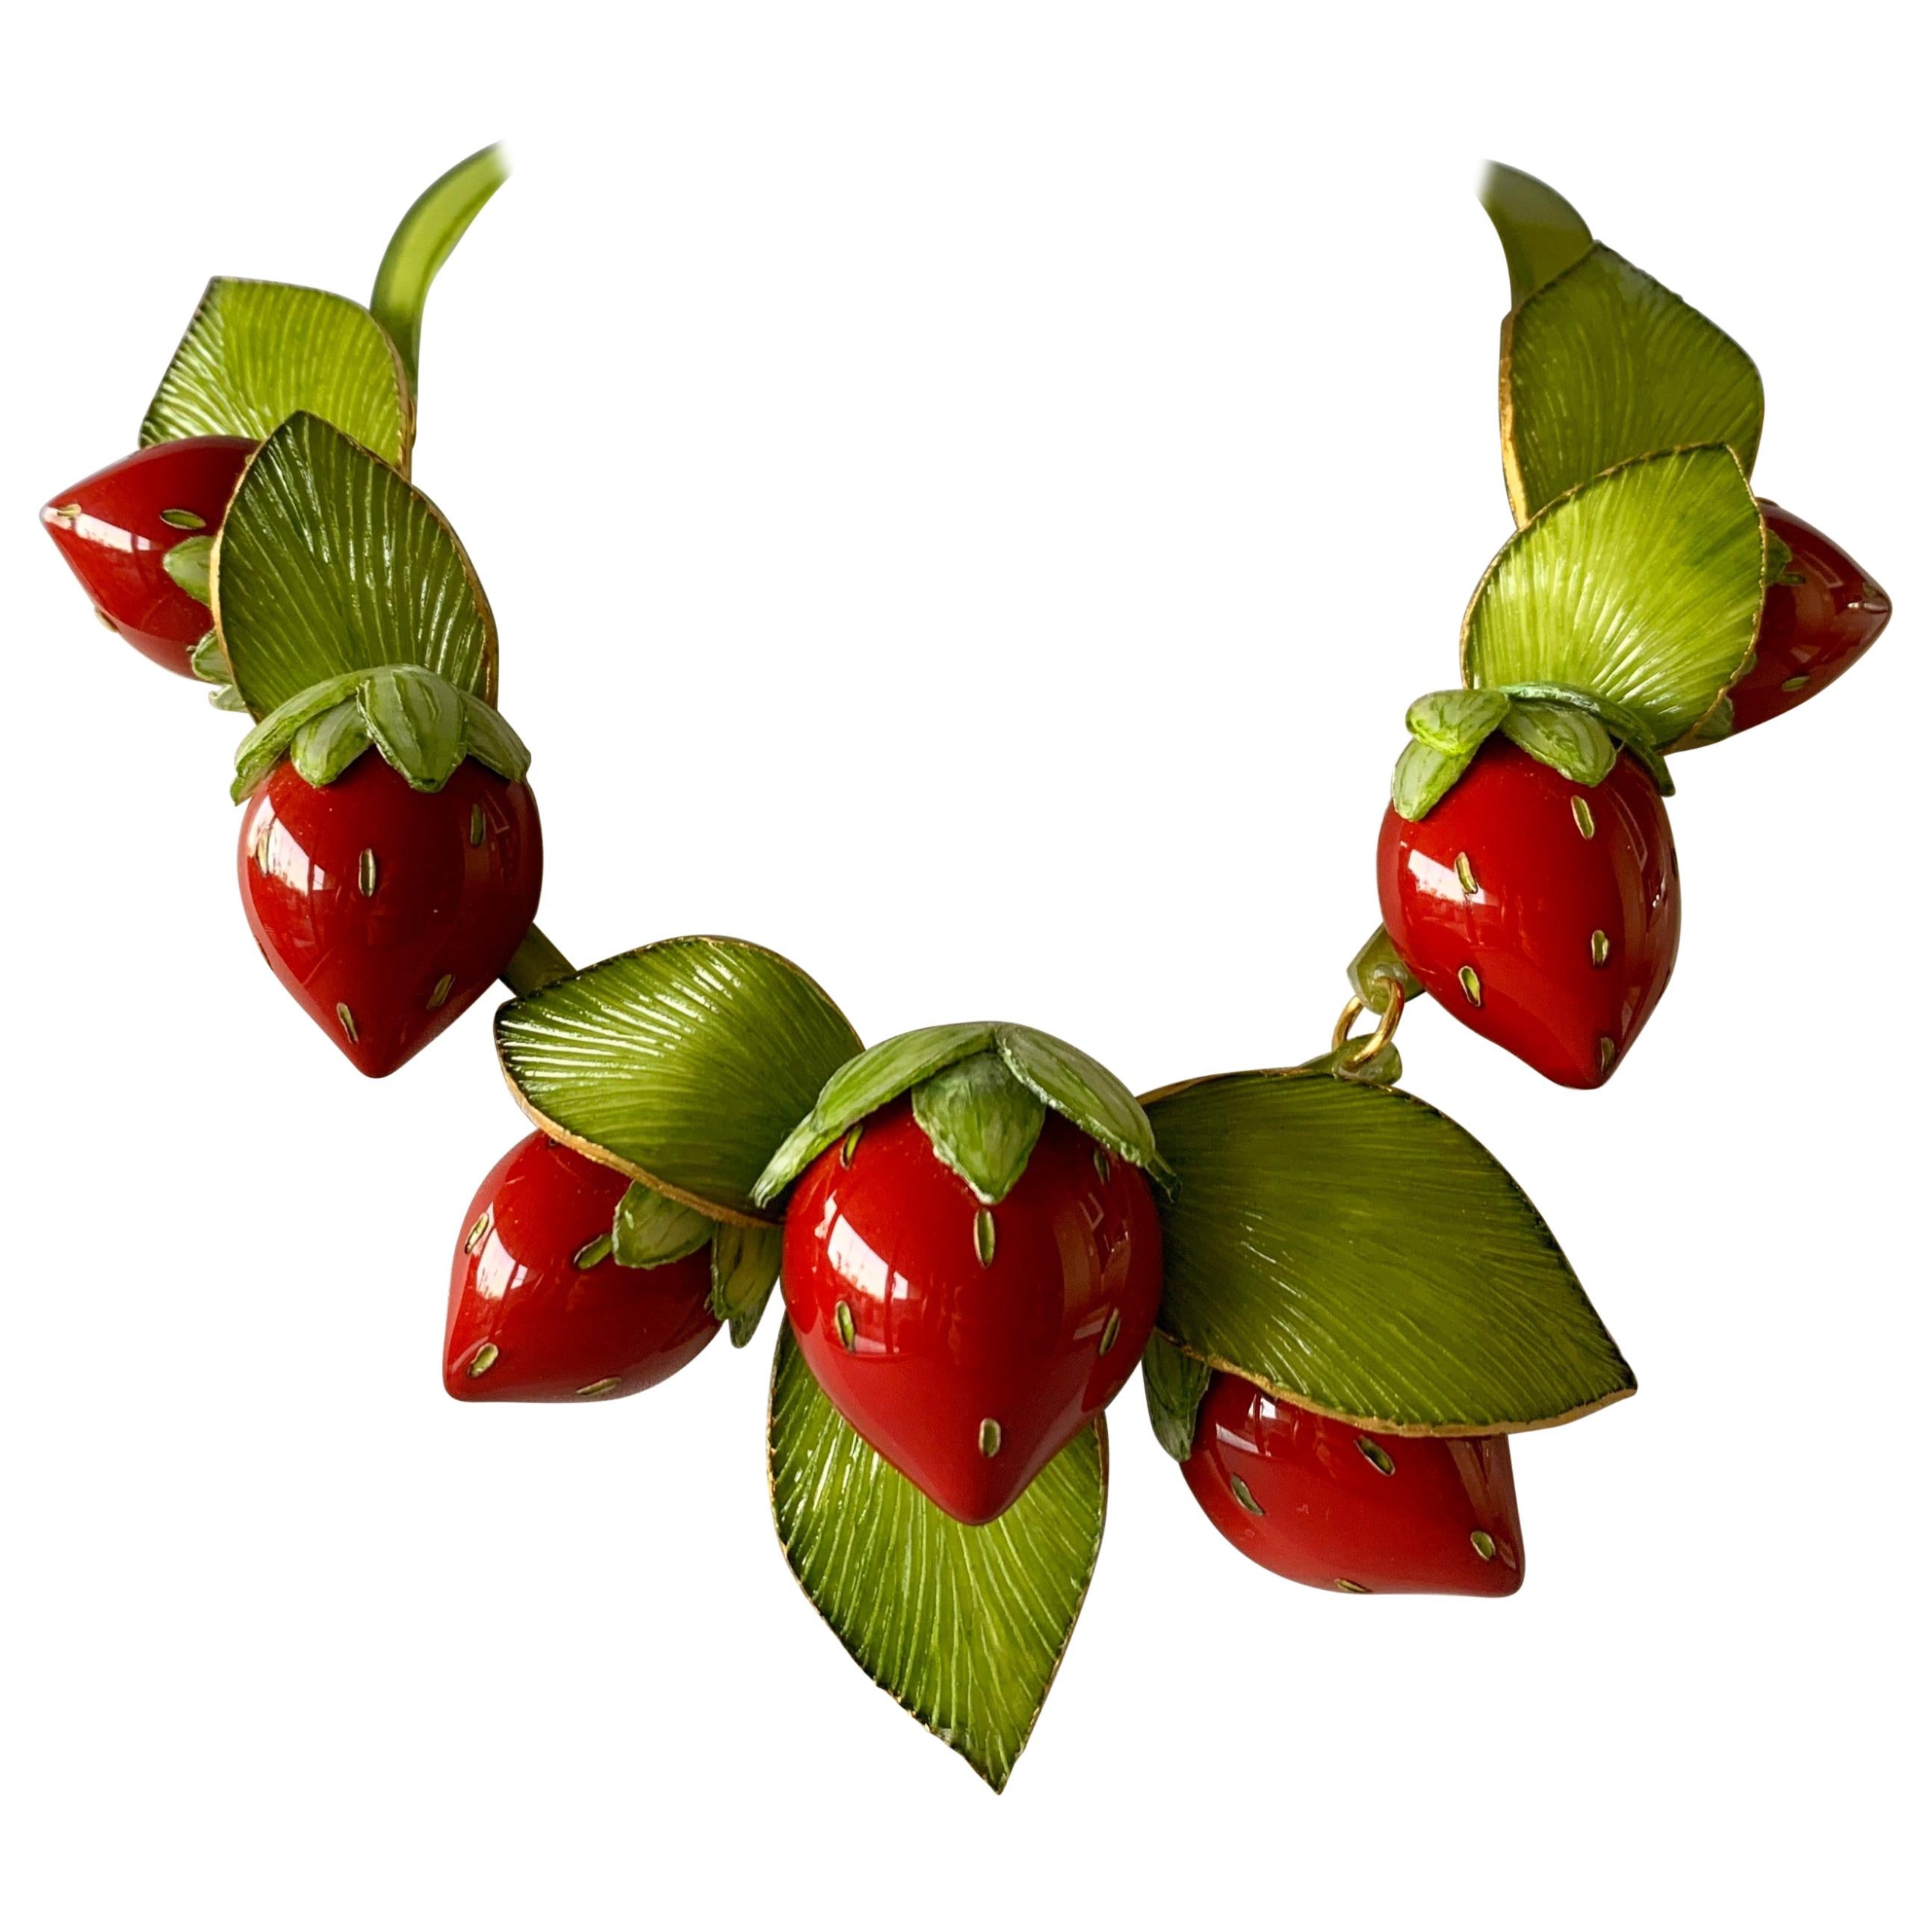 Contemporary  Strawberry Statement Necklace